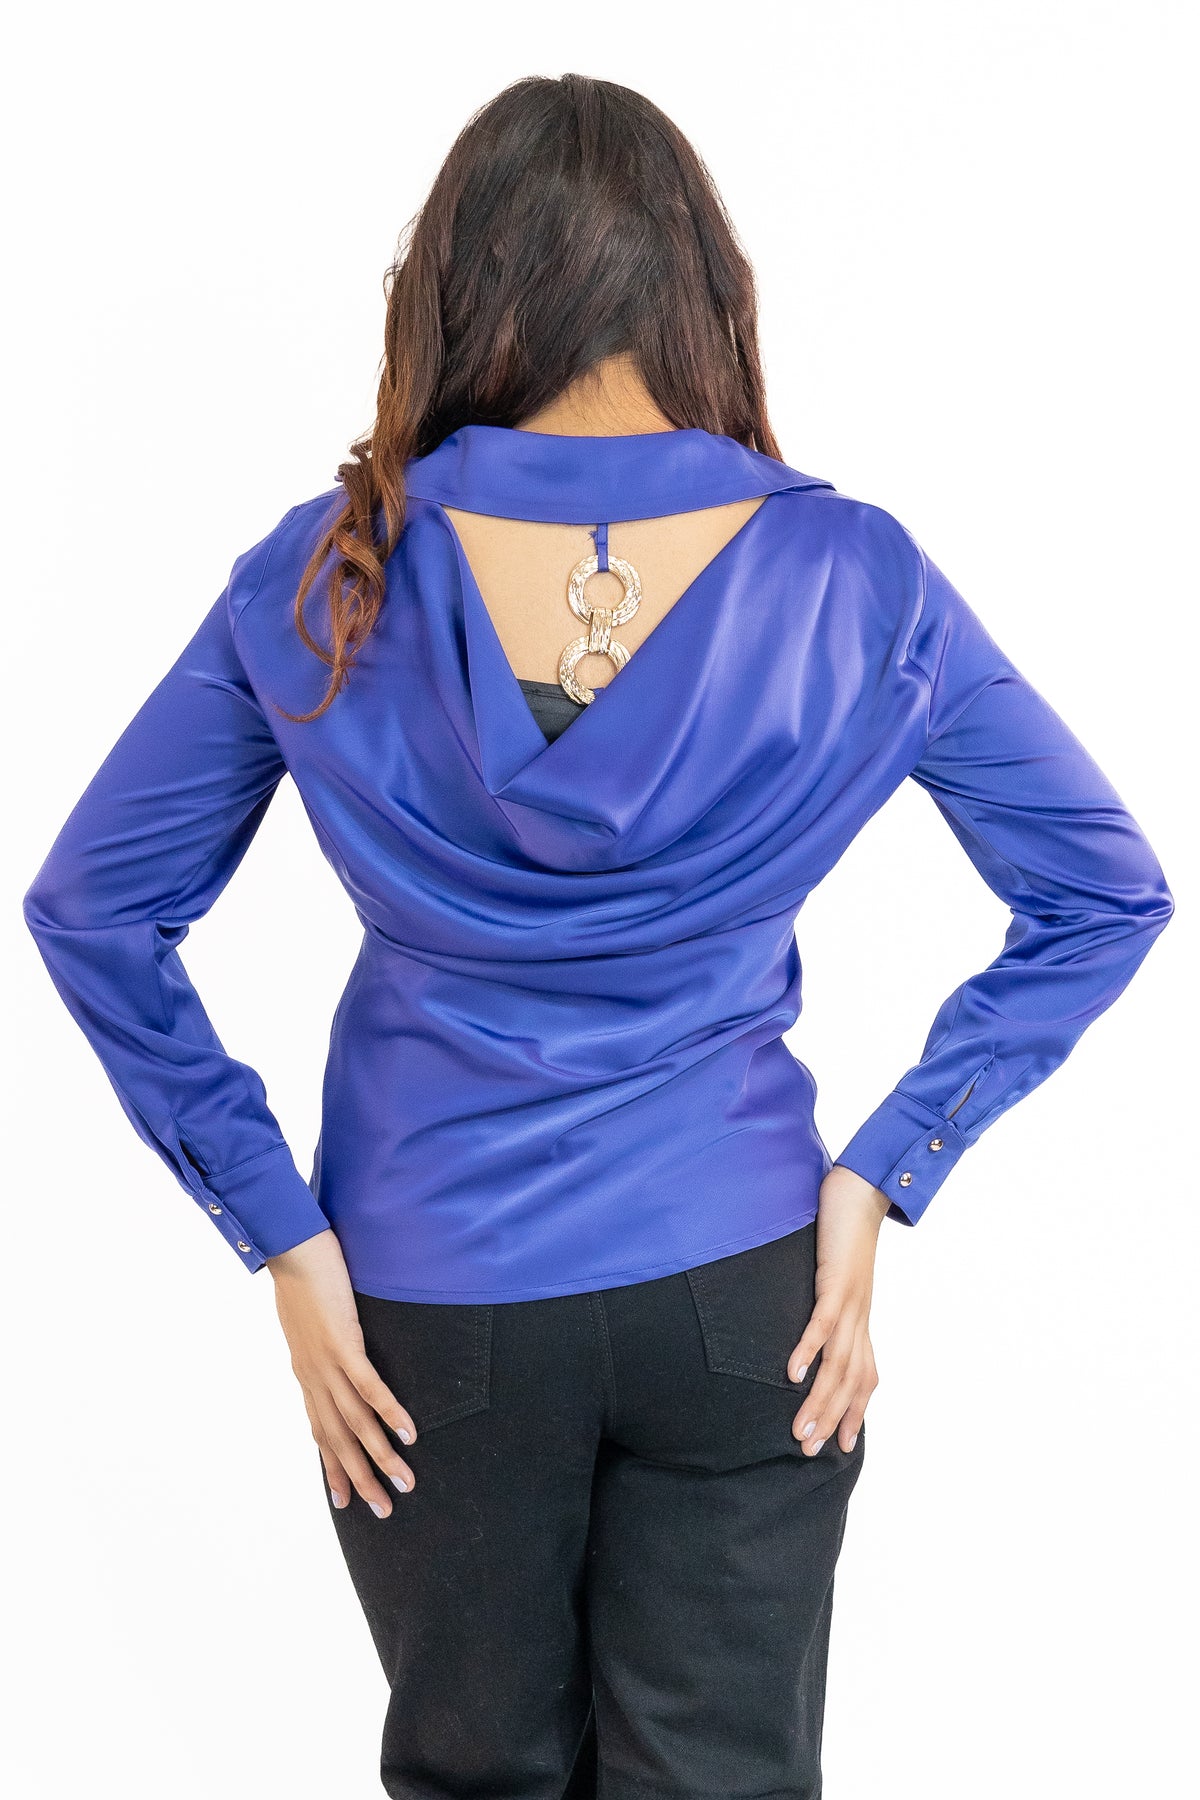 Inspire Greatness blouse